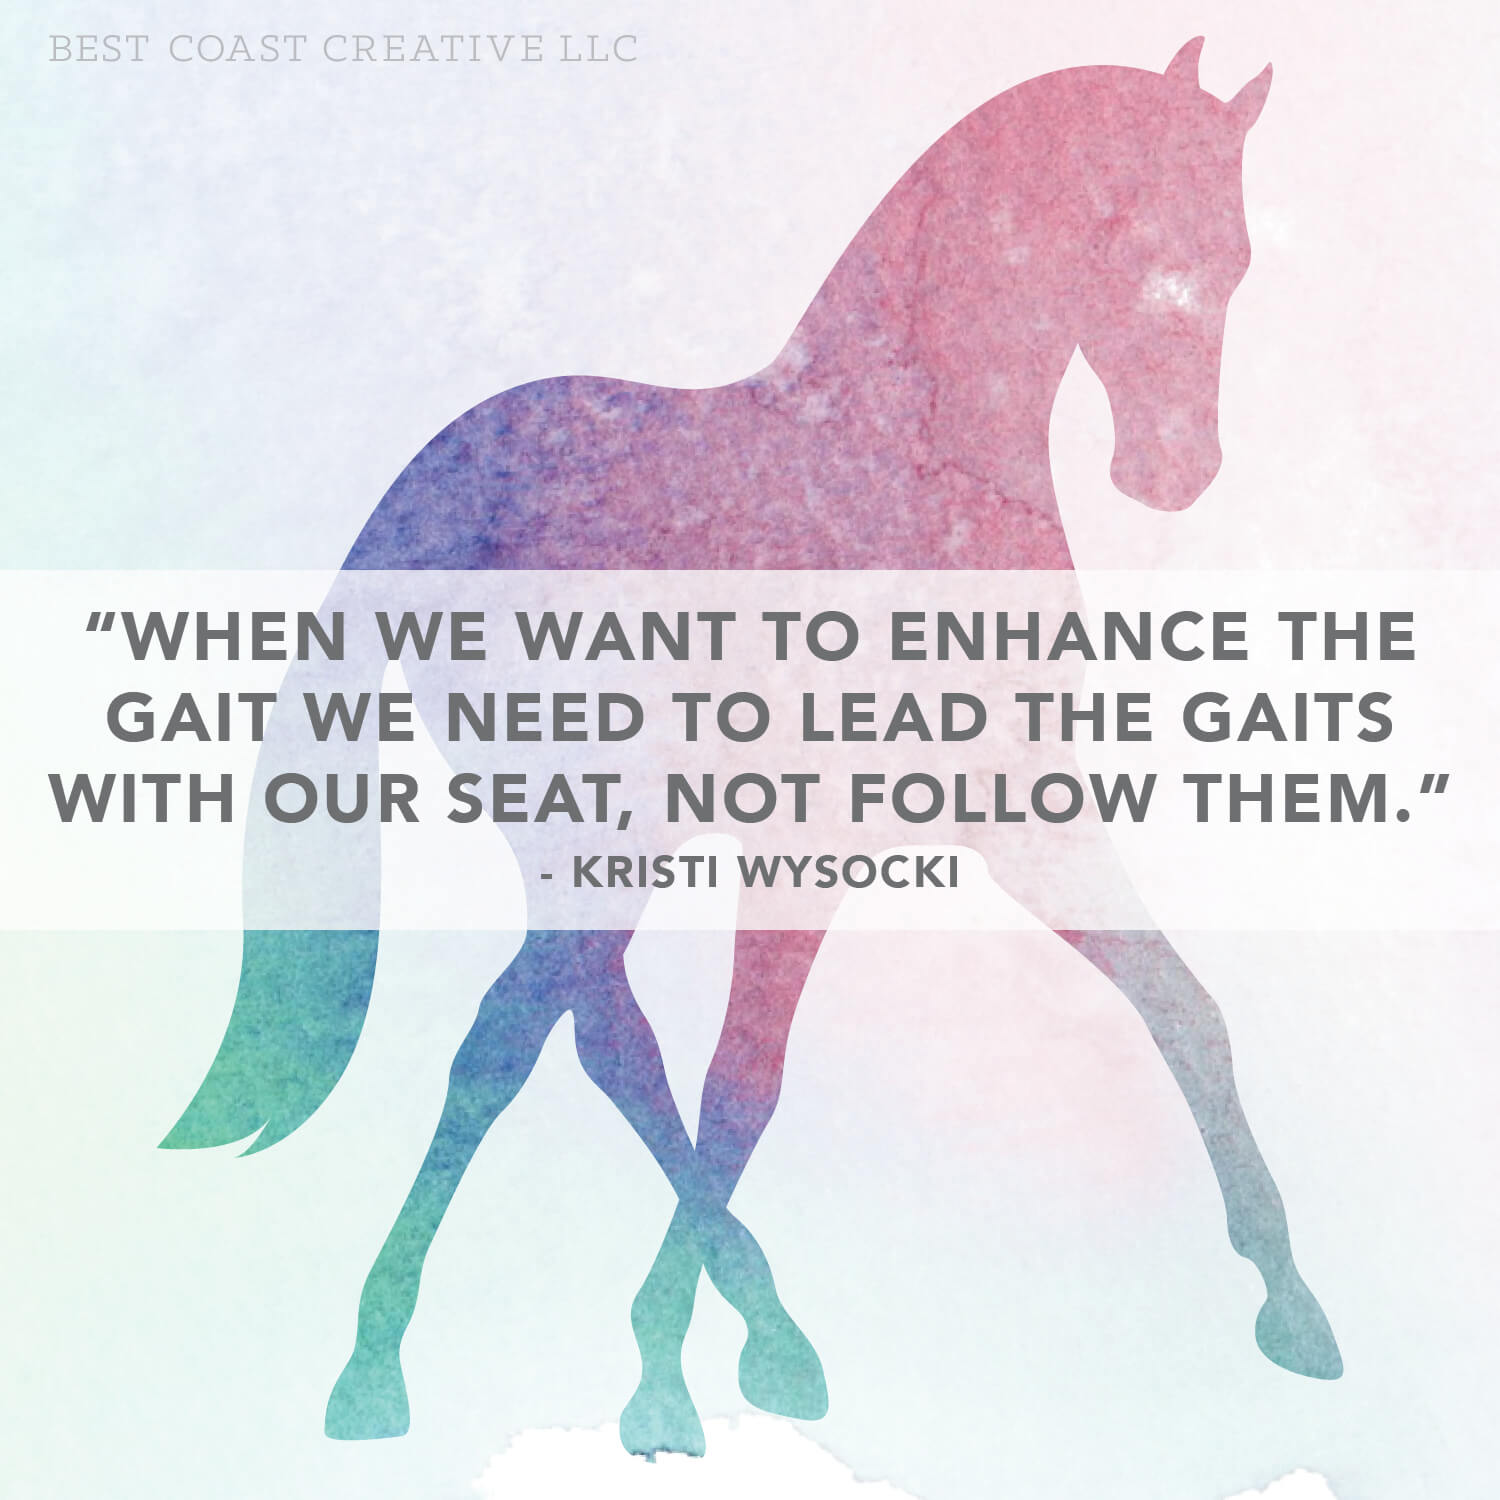 Horse Illustration with Kristi Wysocki clinic quote “When we want to enhance the gait we need to lead the gaits with our seat, not follow them.”